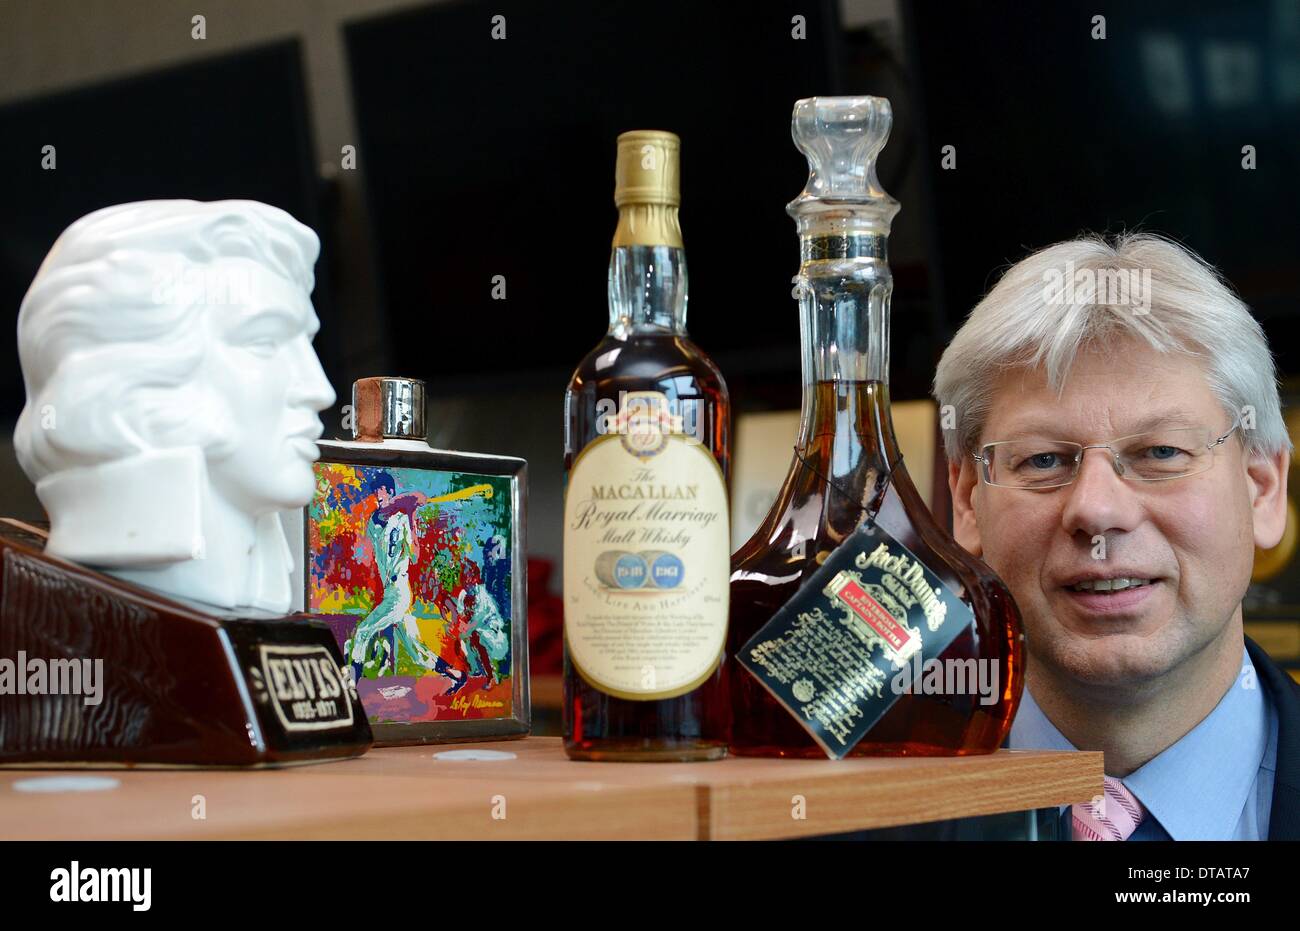 Bietigheim-Bissingen, Germany. 09th Feb, 2014. Auctioneer Christoph Gaertner is pictured in next to whisky bottles in a storage room of his auction house in Bietigheim-Bissingen, Germany, 09 February 2014. The model is part of the biggest private collection of whisky bottles in Europe, by his own account. The collection will be auctioned off on 14 February. The about 2600 bottles and unusual containers partly contain extremely rare whisky brands. Photo: BERND WEIßBROD/dpa/Alamy Live News Stock Photo